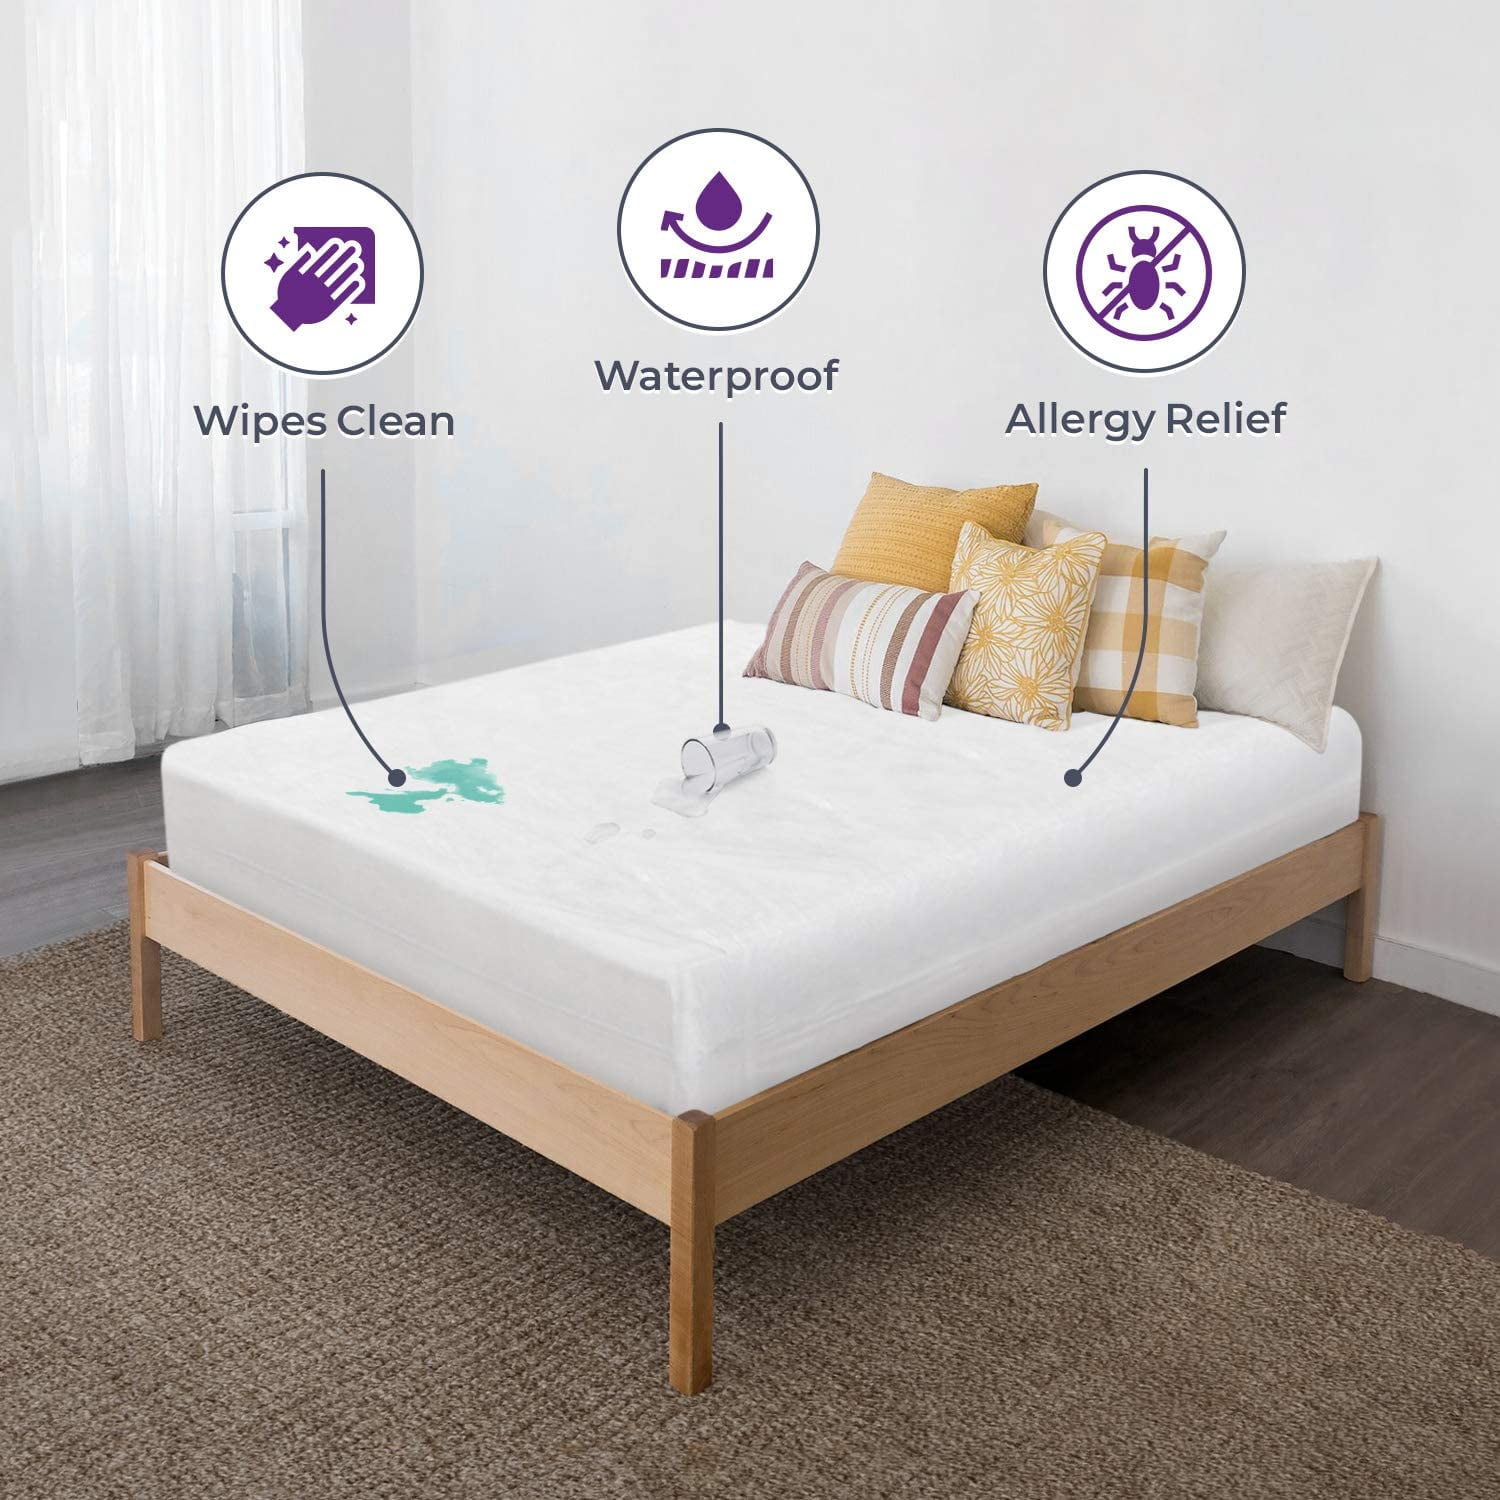 SOFT VINYL MATTRESS COVER PLASTIC PROTECTOR-COMES IN ALL SIZES-SLEEP IN SAFETYxx 